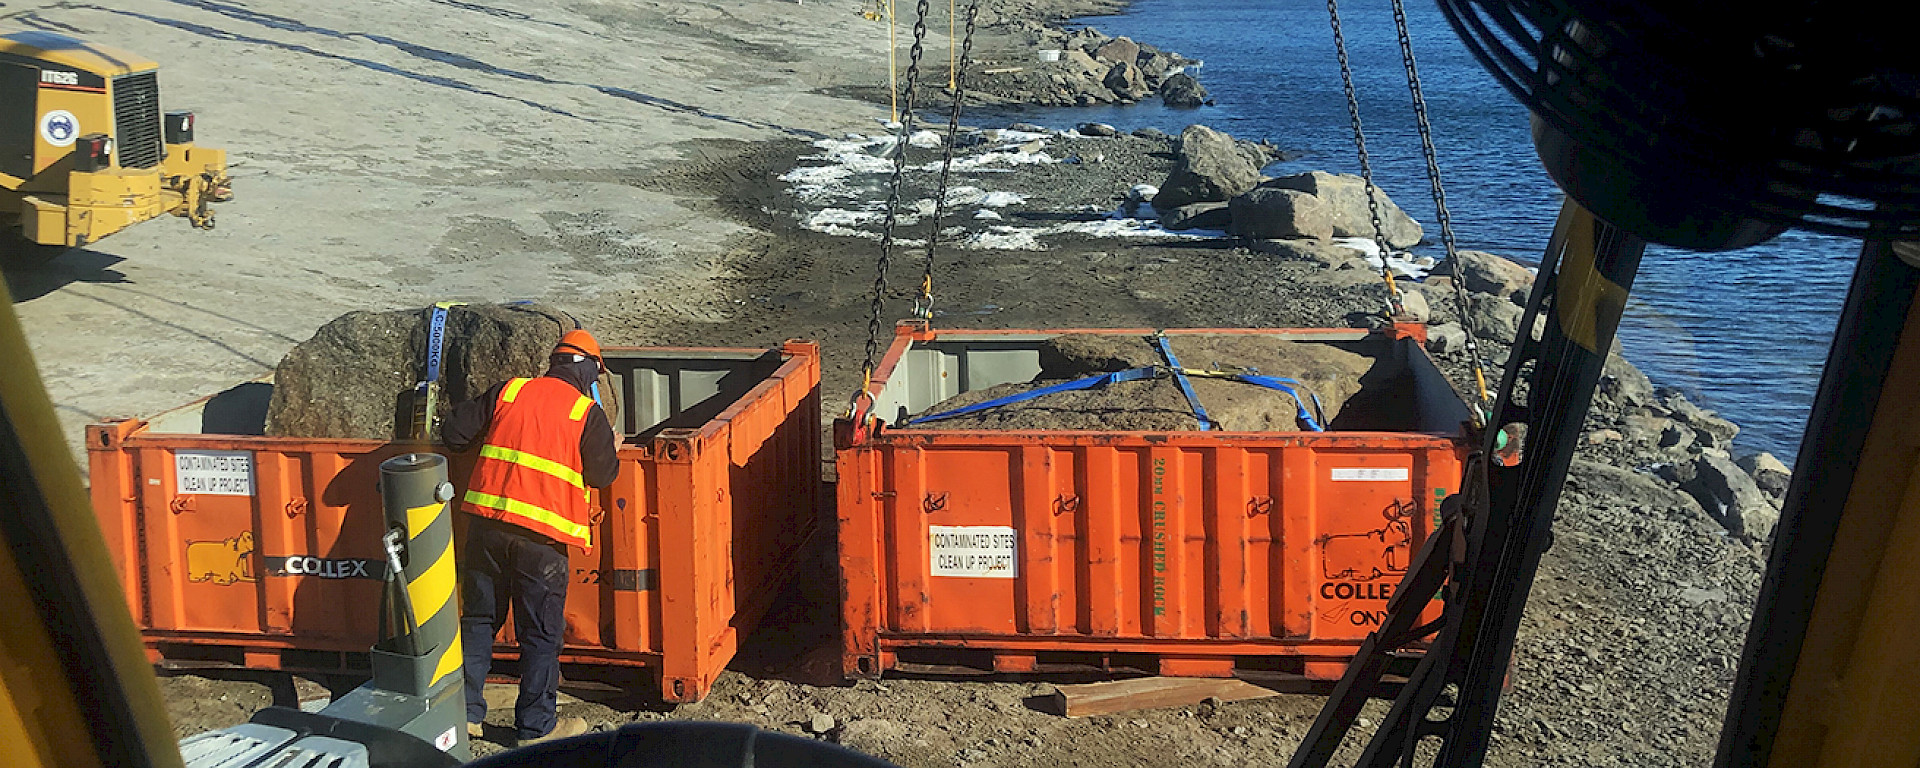 Rocks being craned on to a barge at Mawson research station